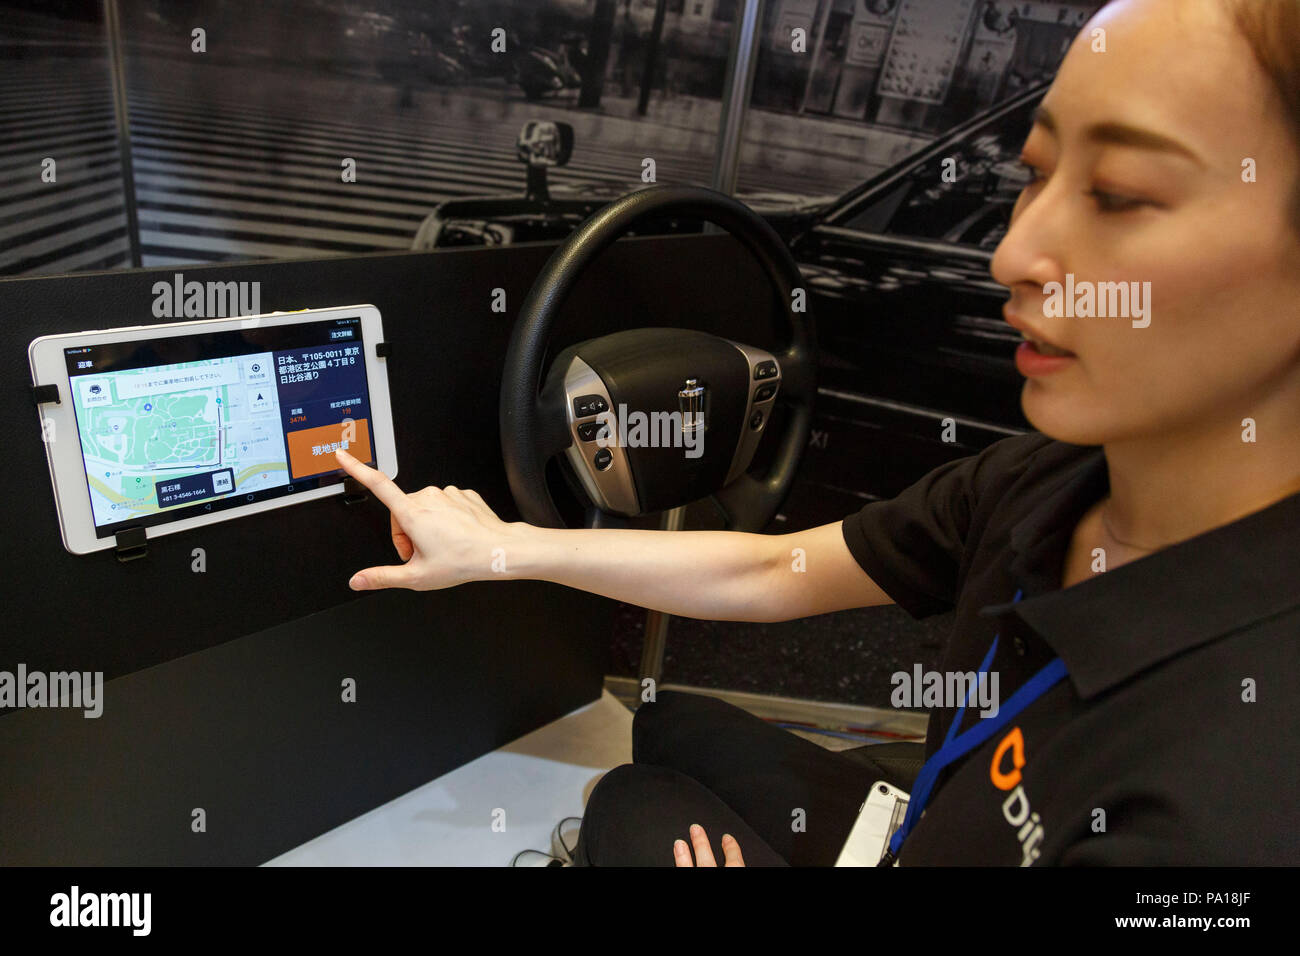 An exhibitor gives a demonstration of Didi Mobility Japan app during the SoftBank World 2018 on July 20, 2018, Tokyo, Japan. SoftBank World 2018 showcases companies working with AI (Artificial Intelligence) and in IoT (the Internet of Things), developing the latest applications for robots in various business fields. The show runs until July 20. Credit: Rodrigo Reyes Marin/AFLO/Alamy Live News Stock Photo